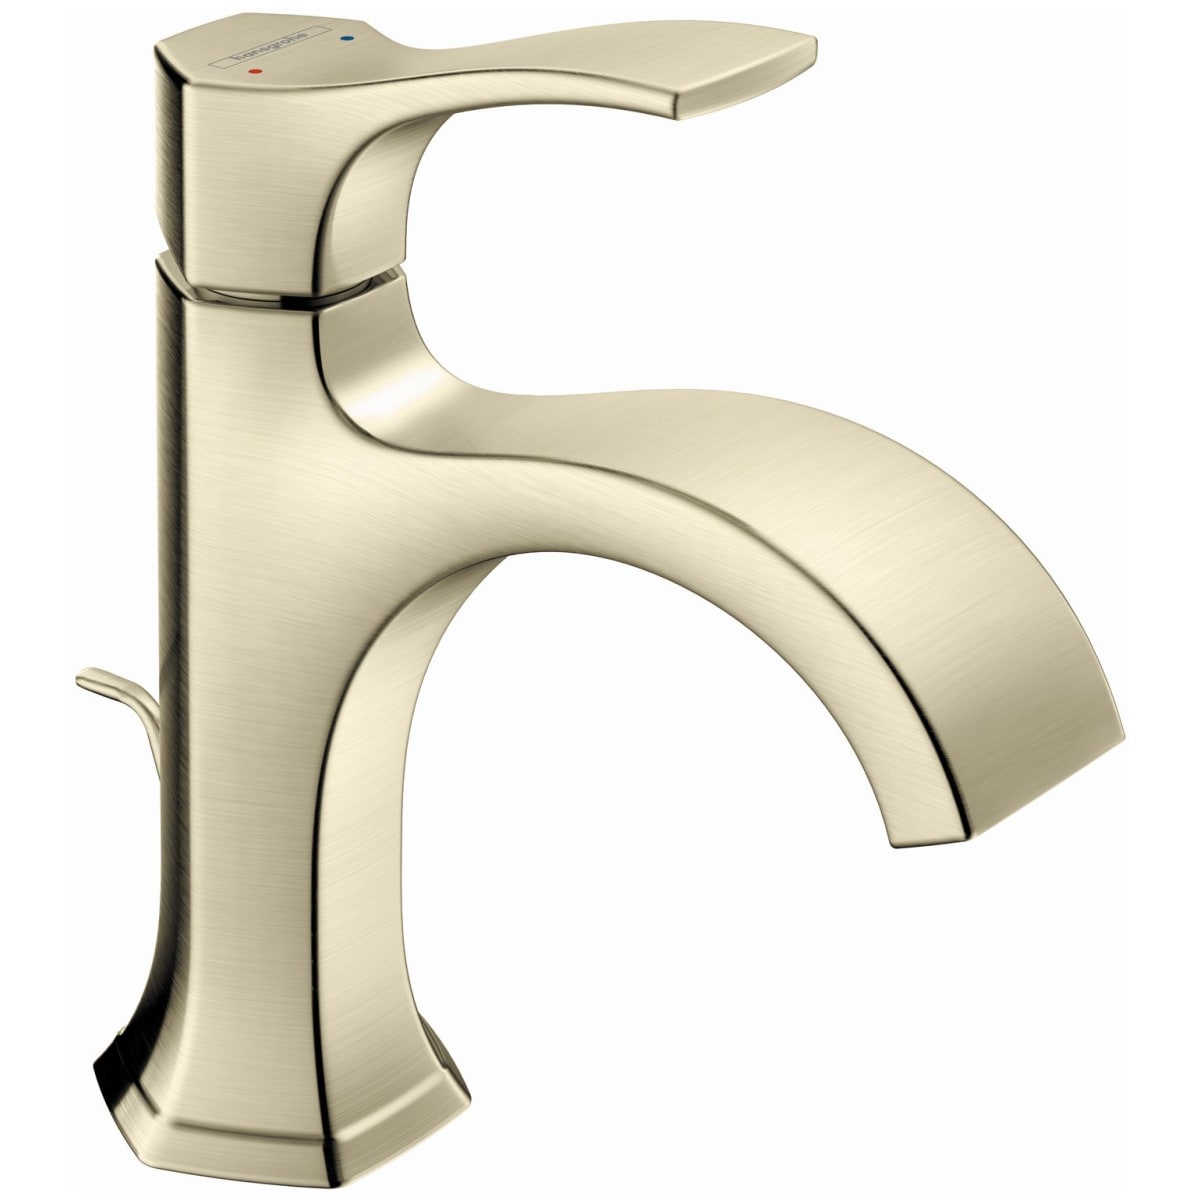 Hansgrohe Brushed Gold Optic Locarno 1.2 GPM Single Hole Bathroom Faucet with Pop-Up Drain Assembly - Faucet.com